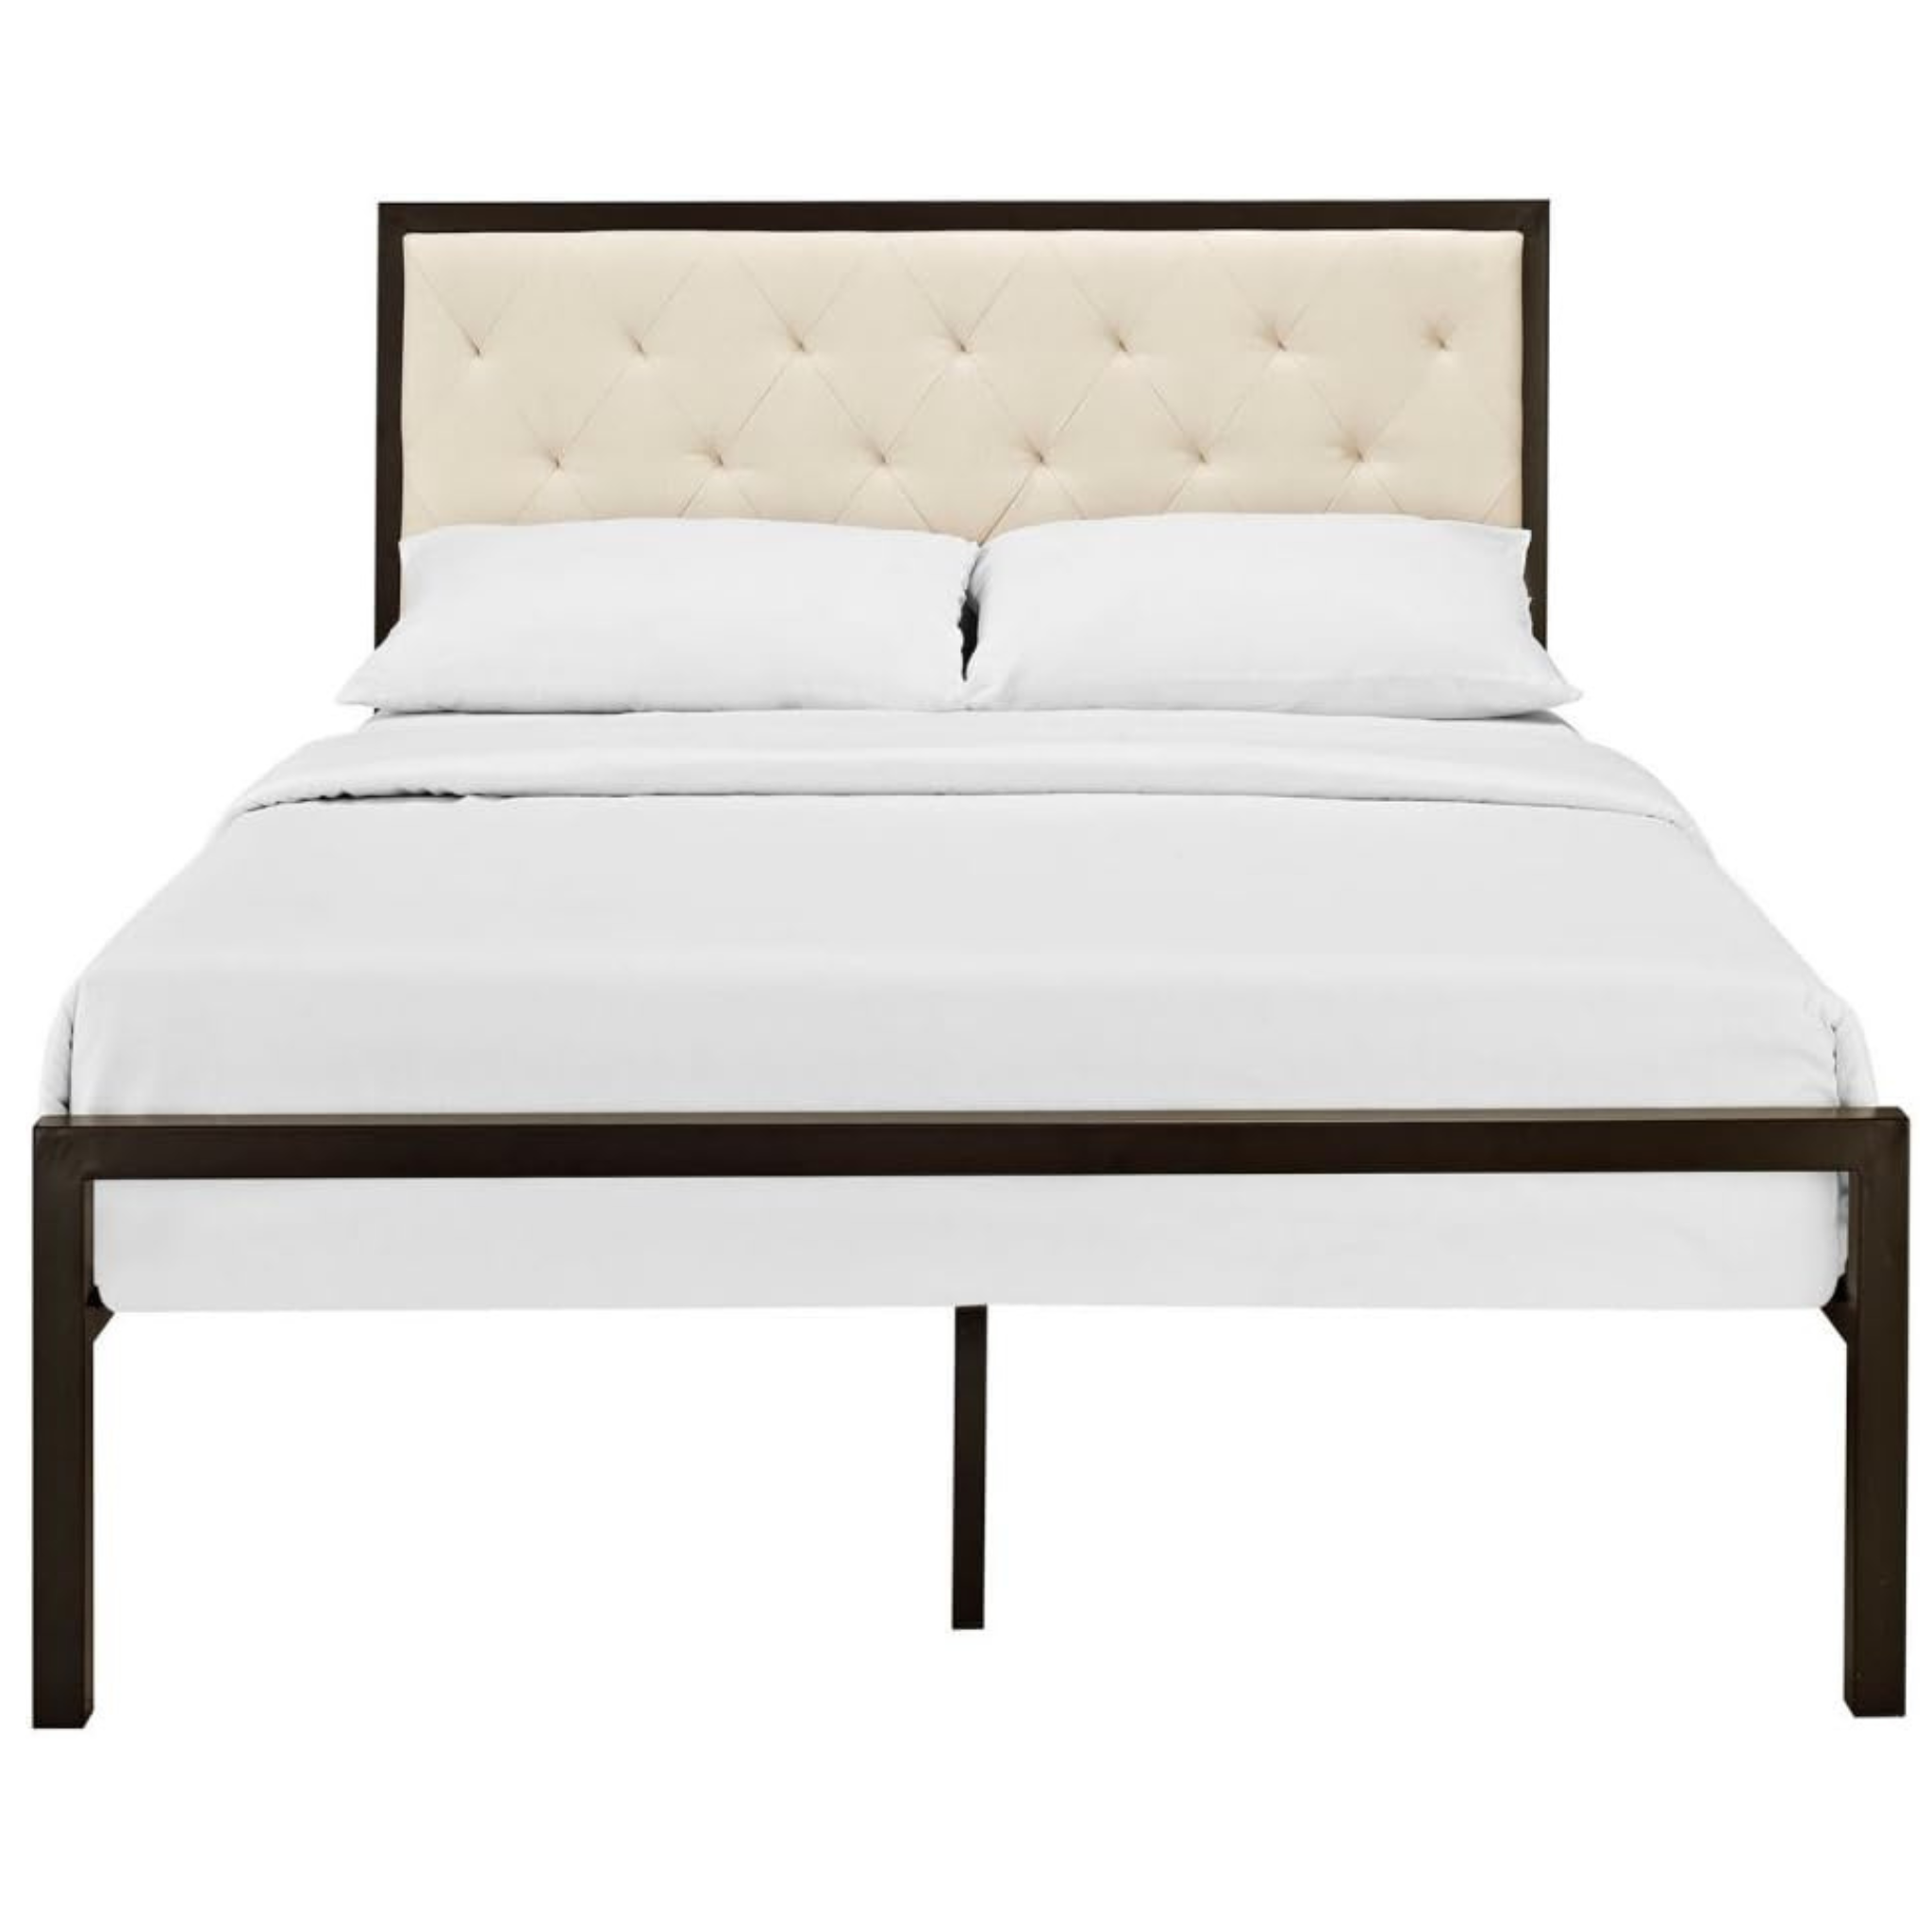 Mia Upholstered Tufted Platform Bed with Metal Slat Support